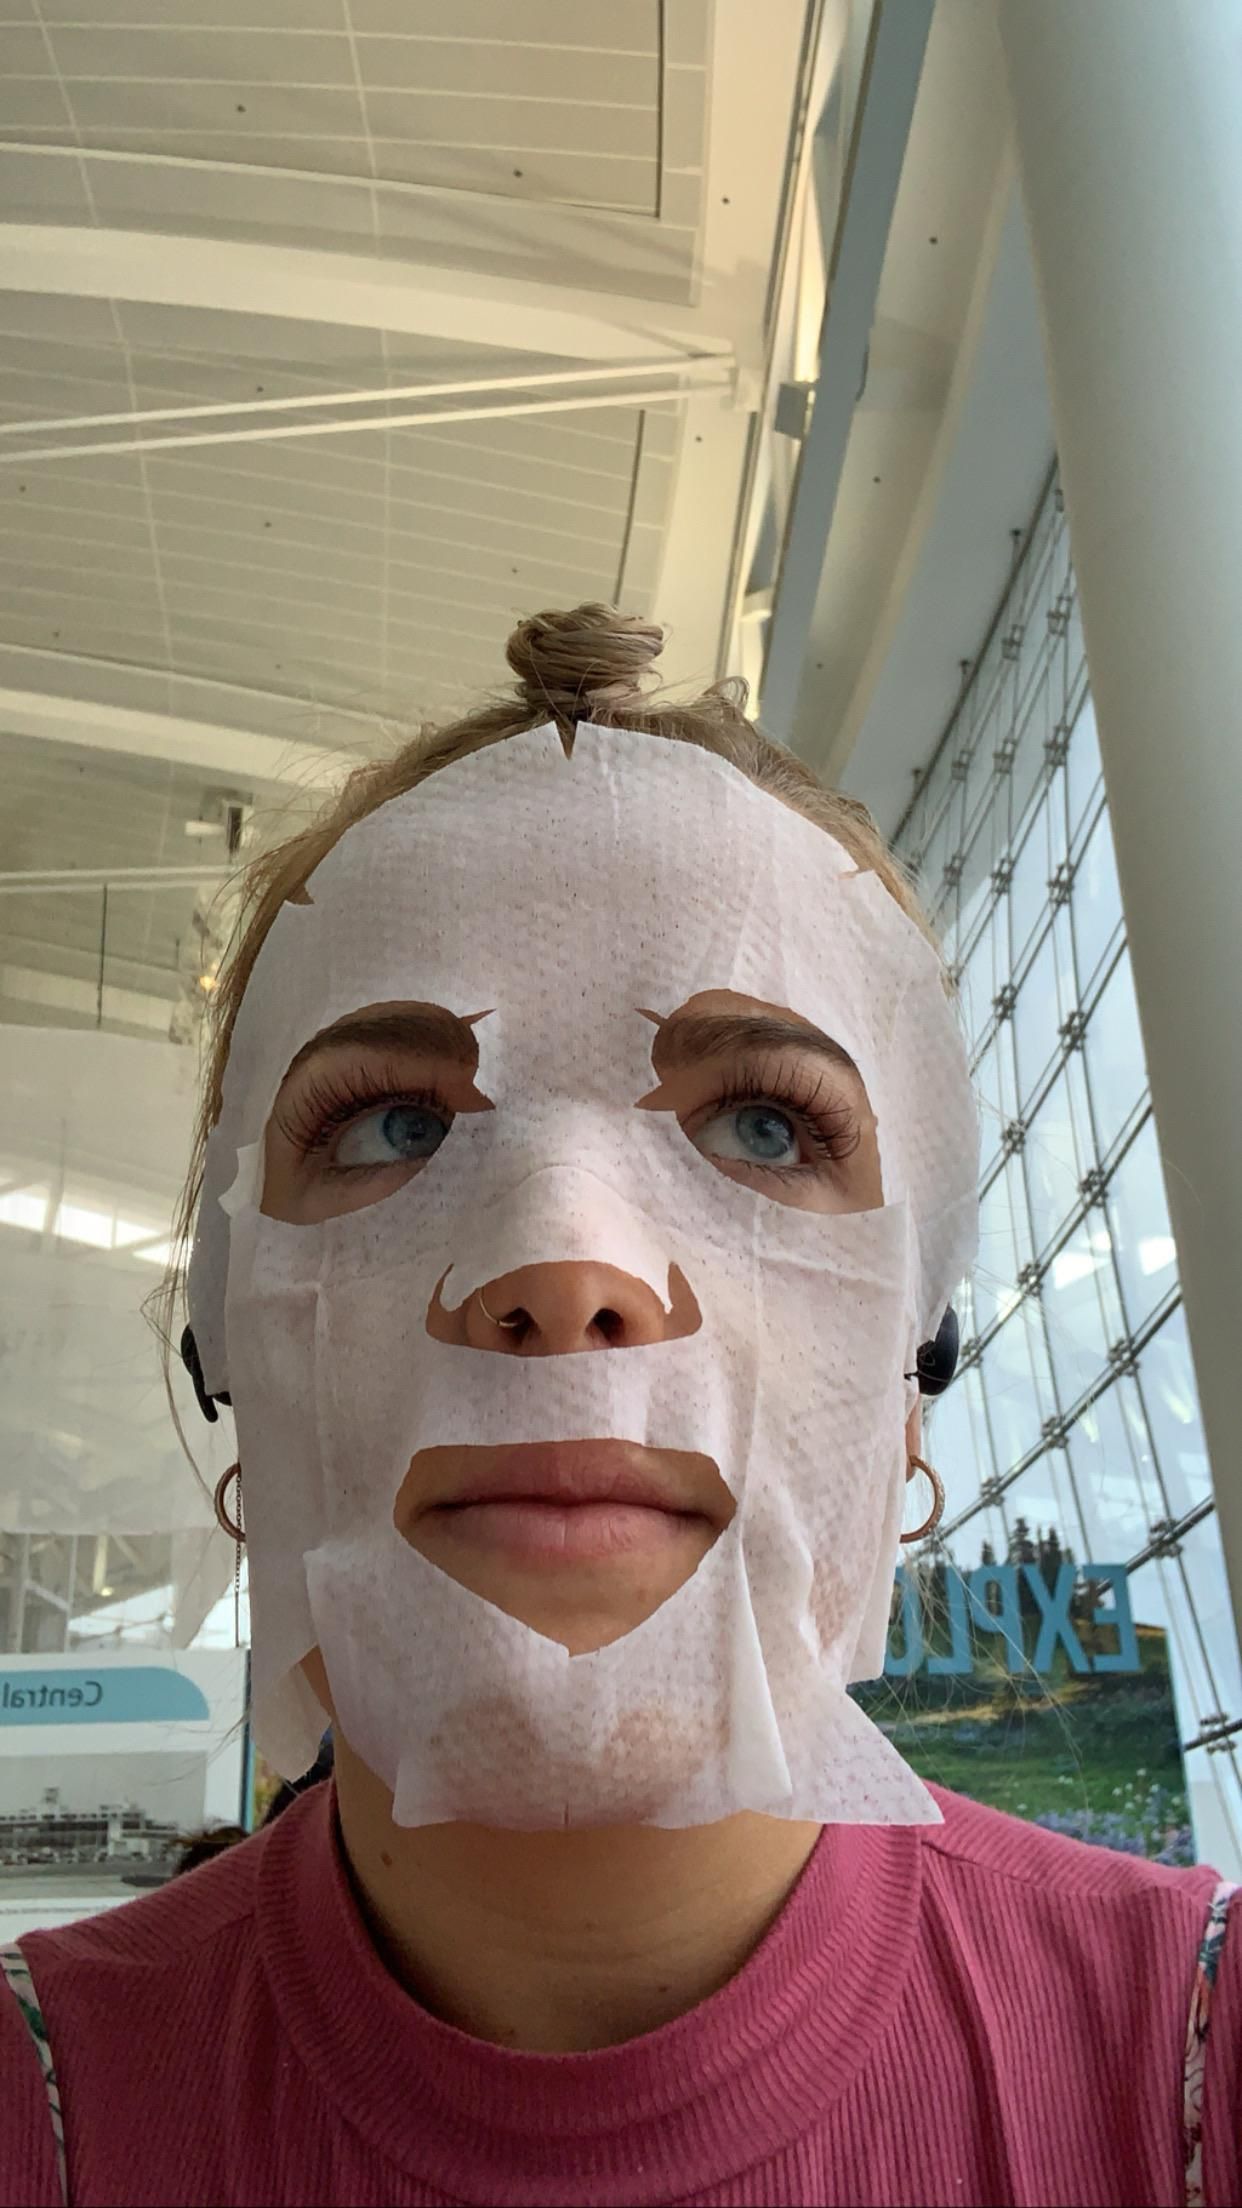 Heard we’re all supposed to wear masks at the airport. I don’t really know how this is gonna help but my skin feels great